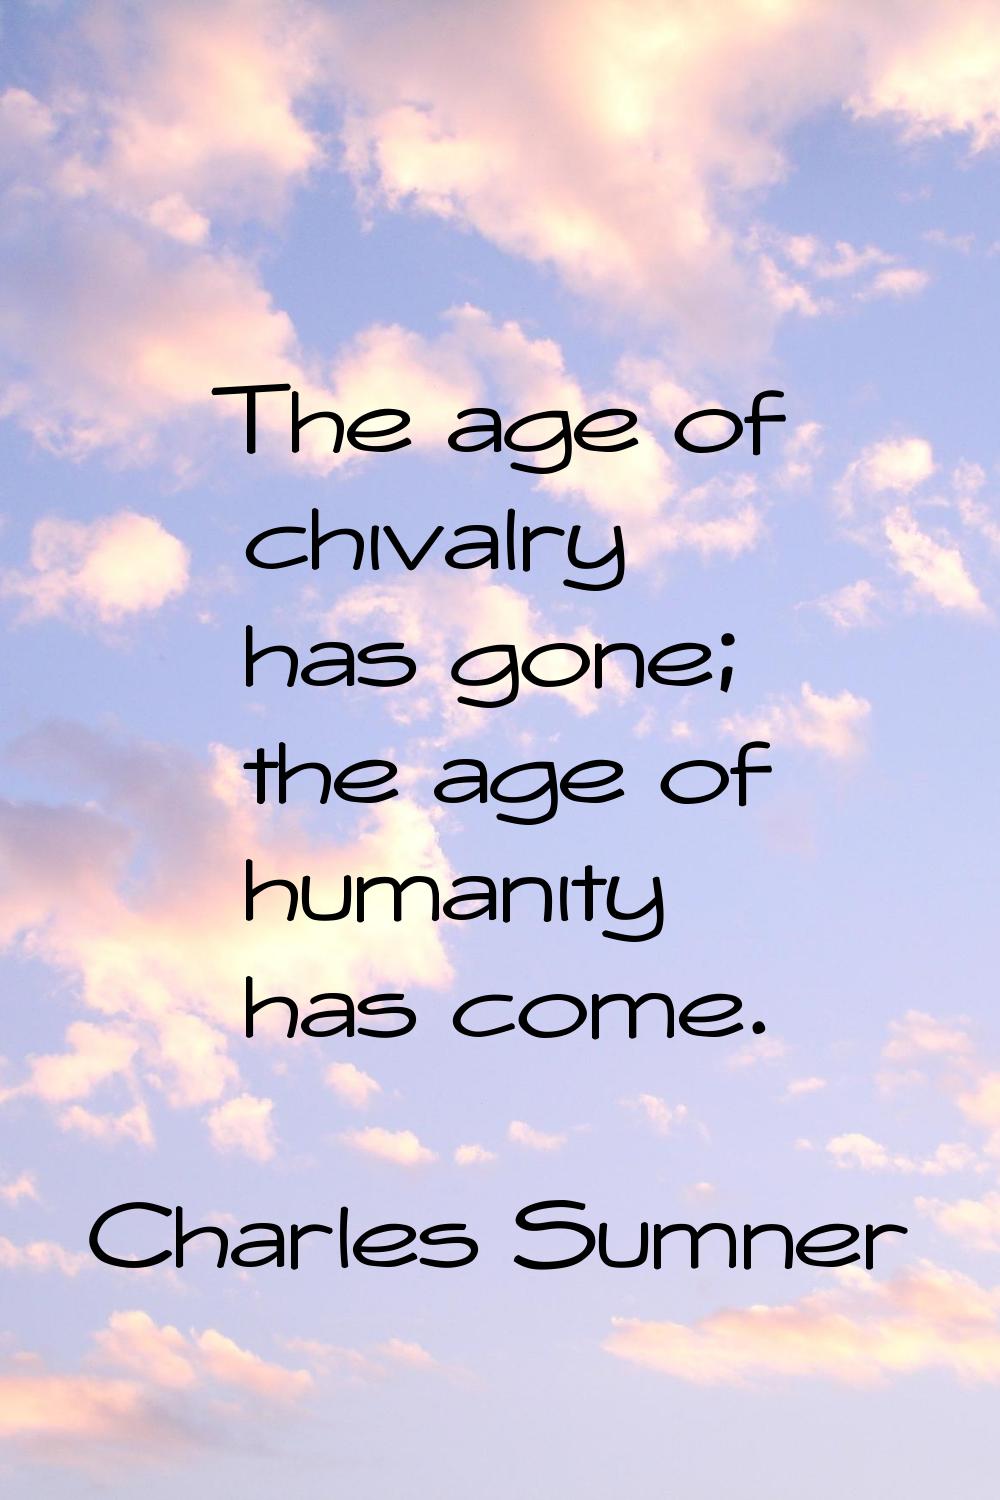 The age of chivalry has gone; the age of humanity has come.